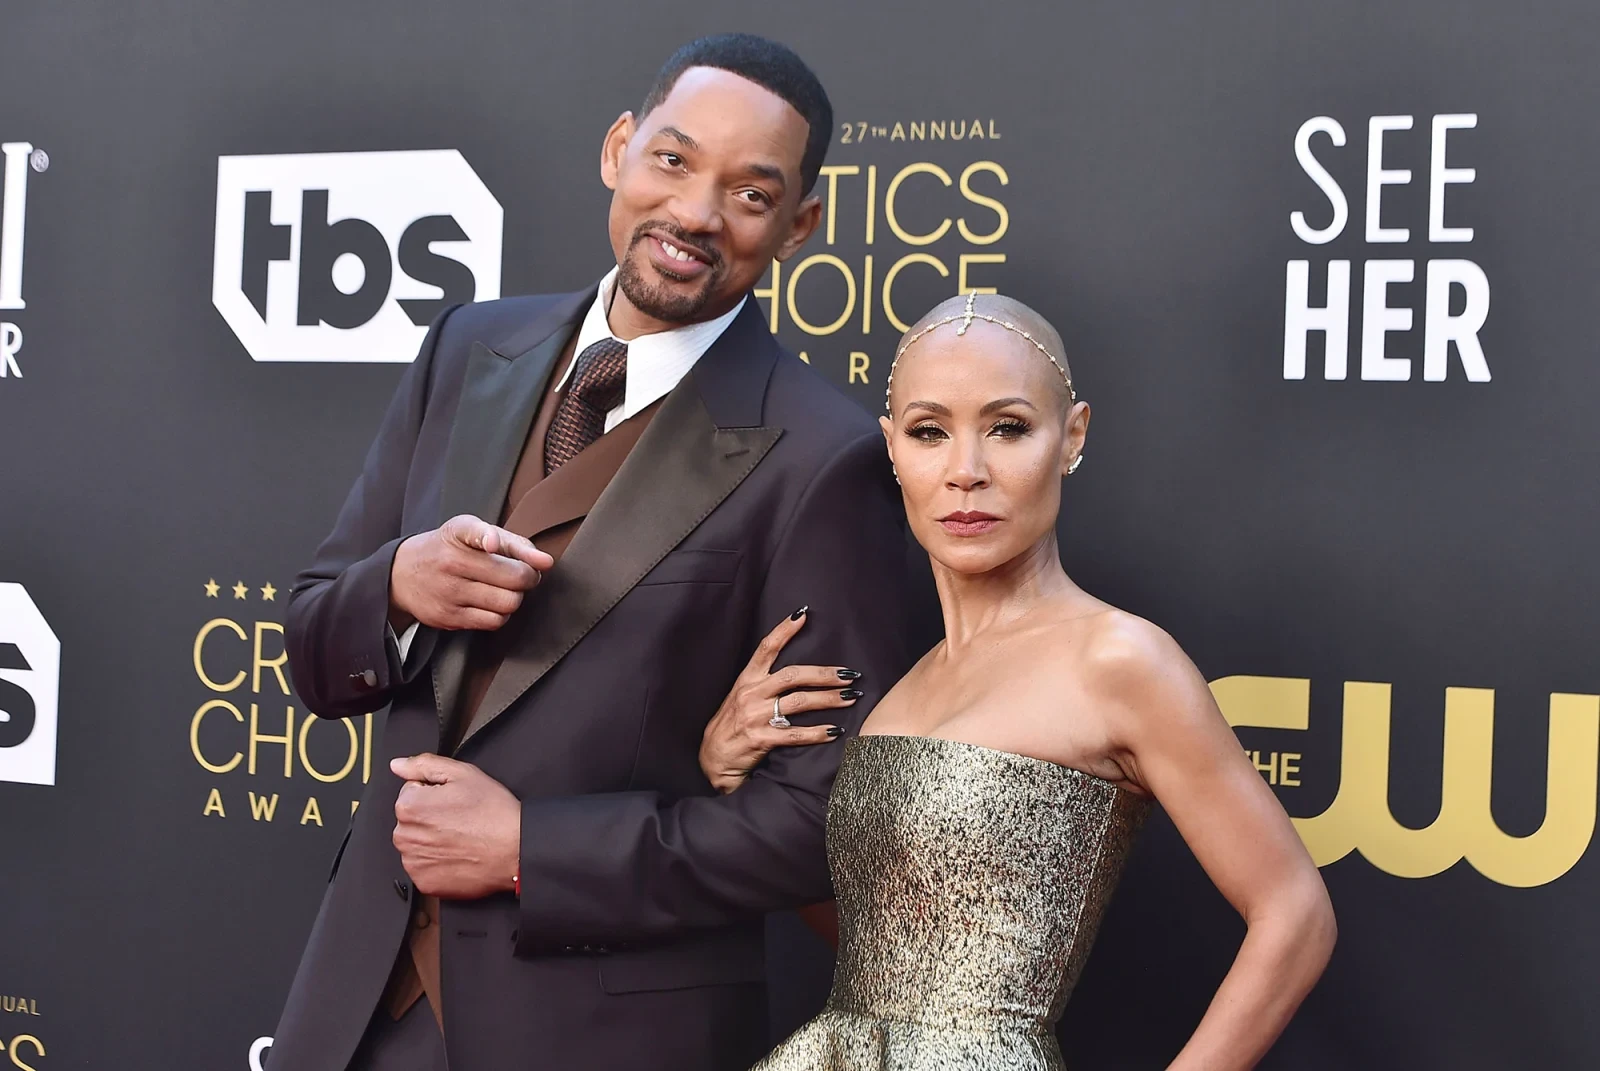 Will Smith and Jada Pinkett Smith at an event